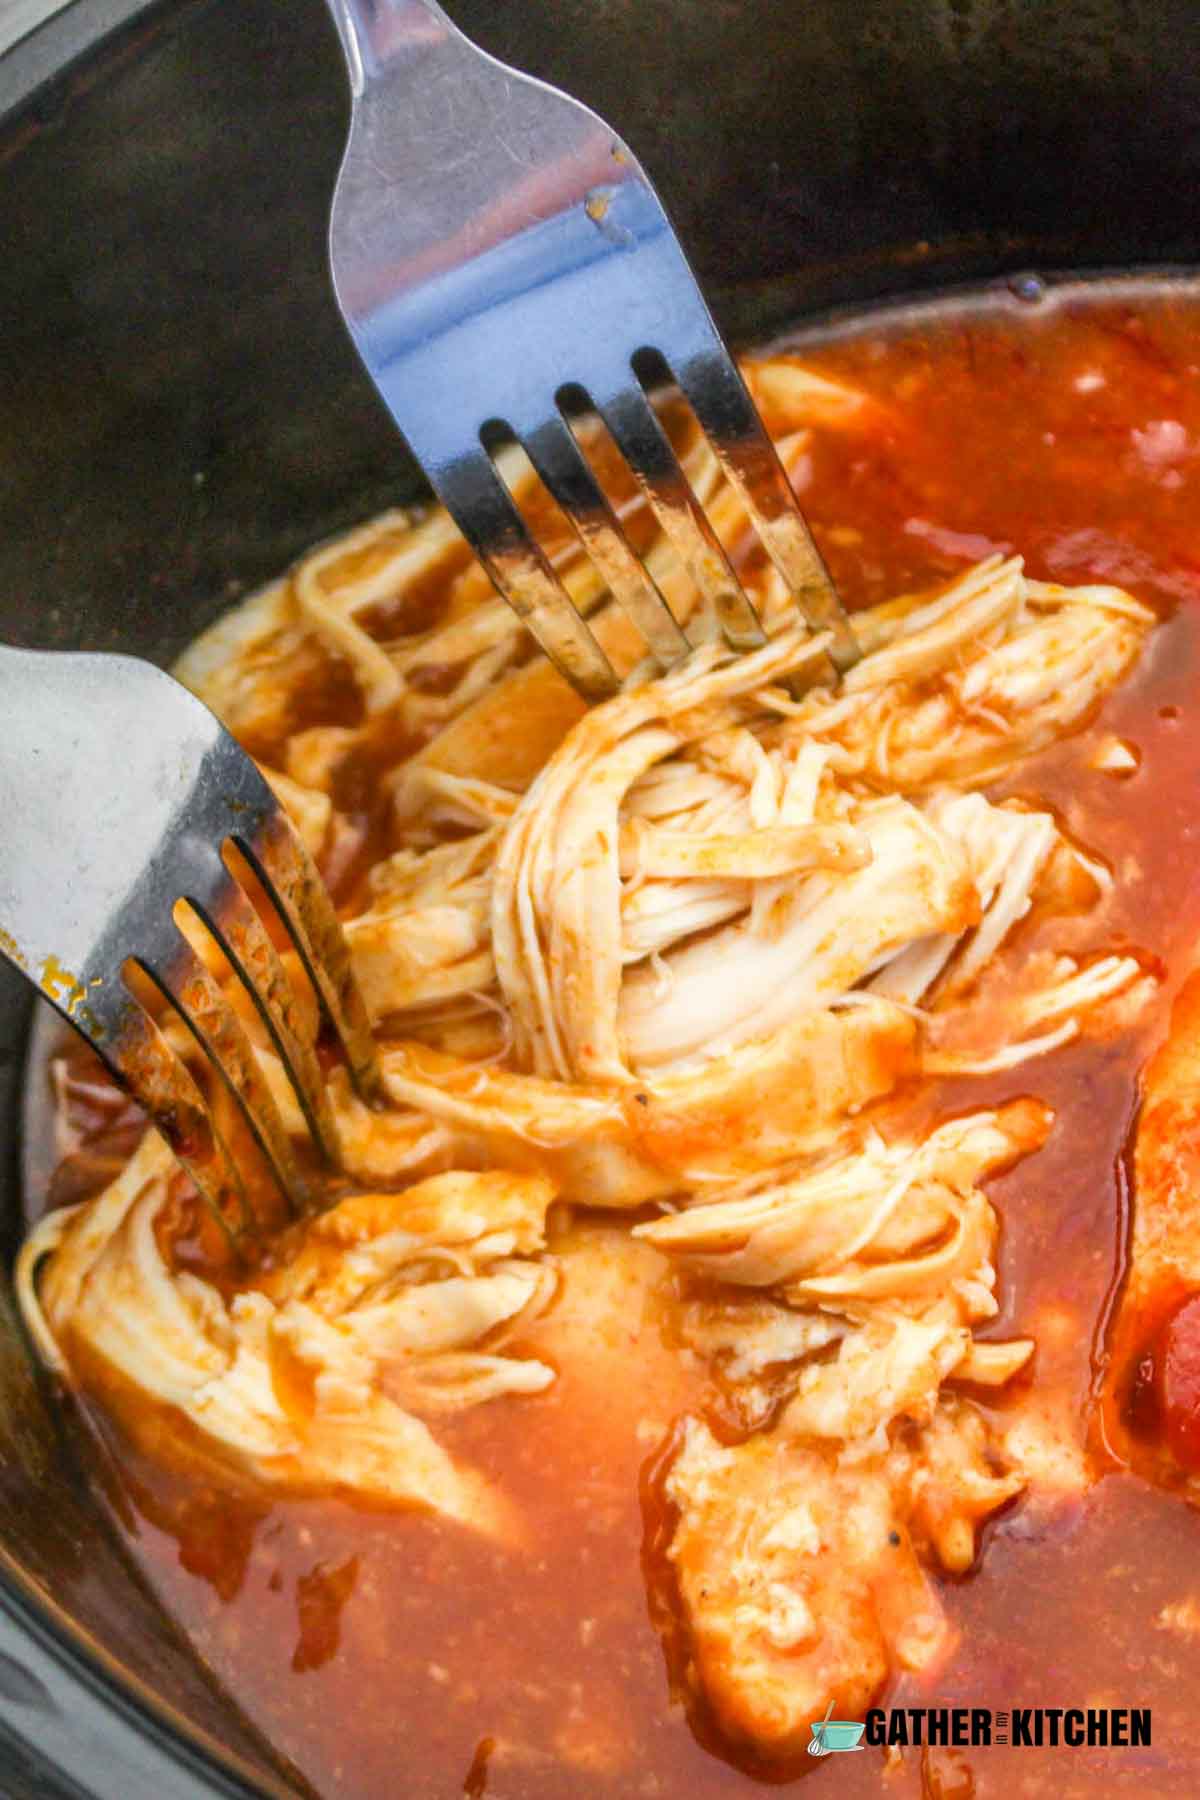 Forks pulling apart chicken into shreds.